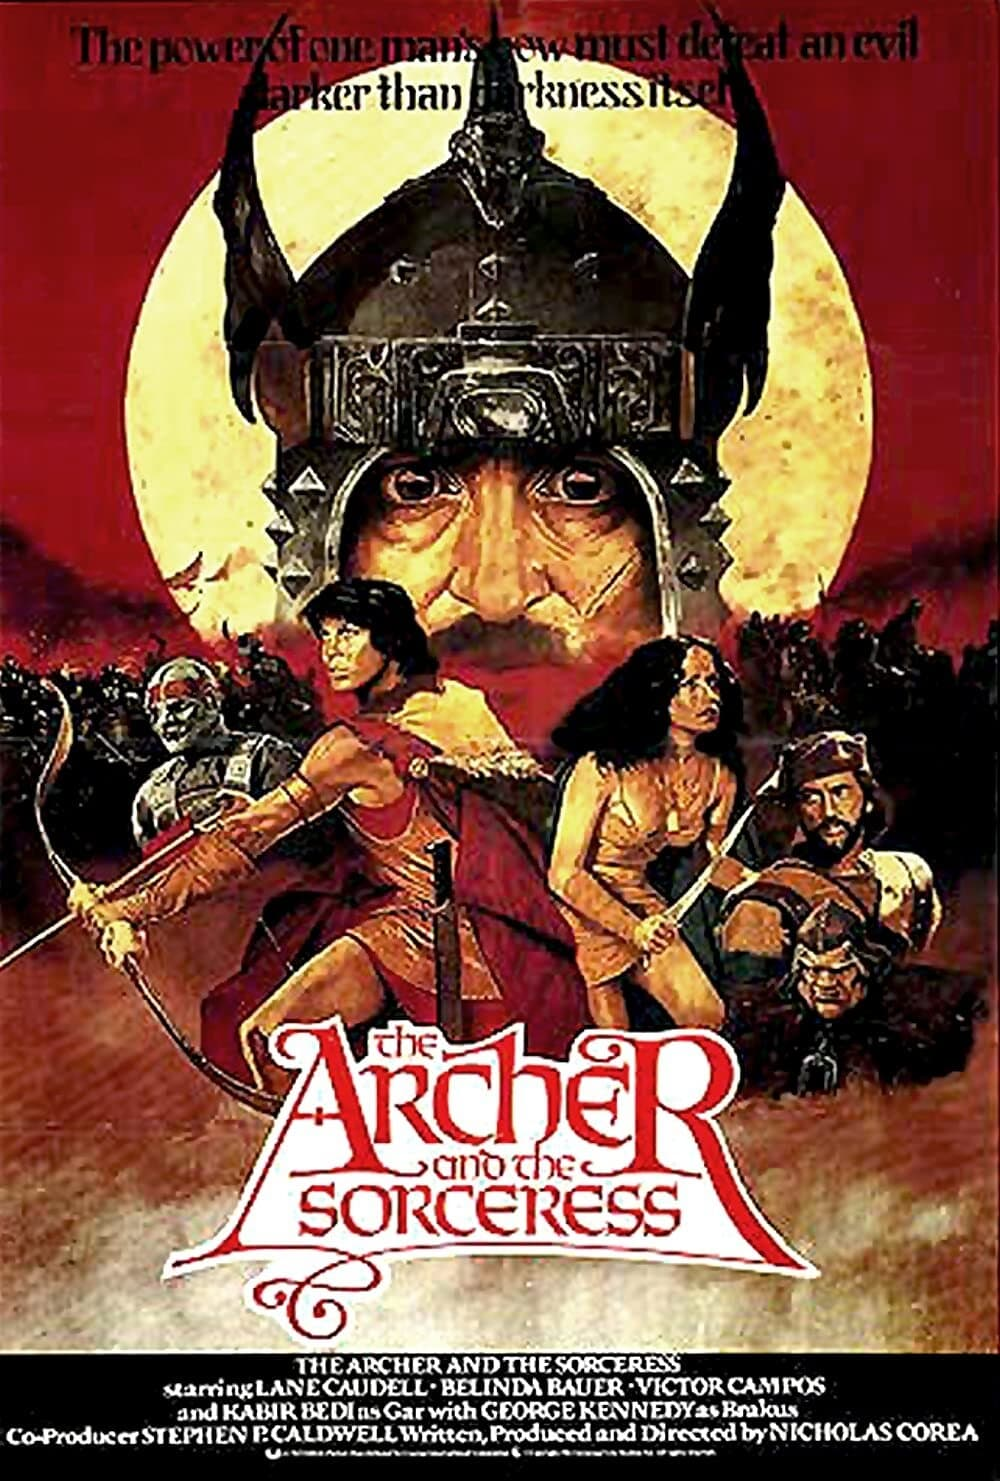 The Archer, 1981